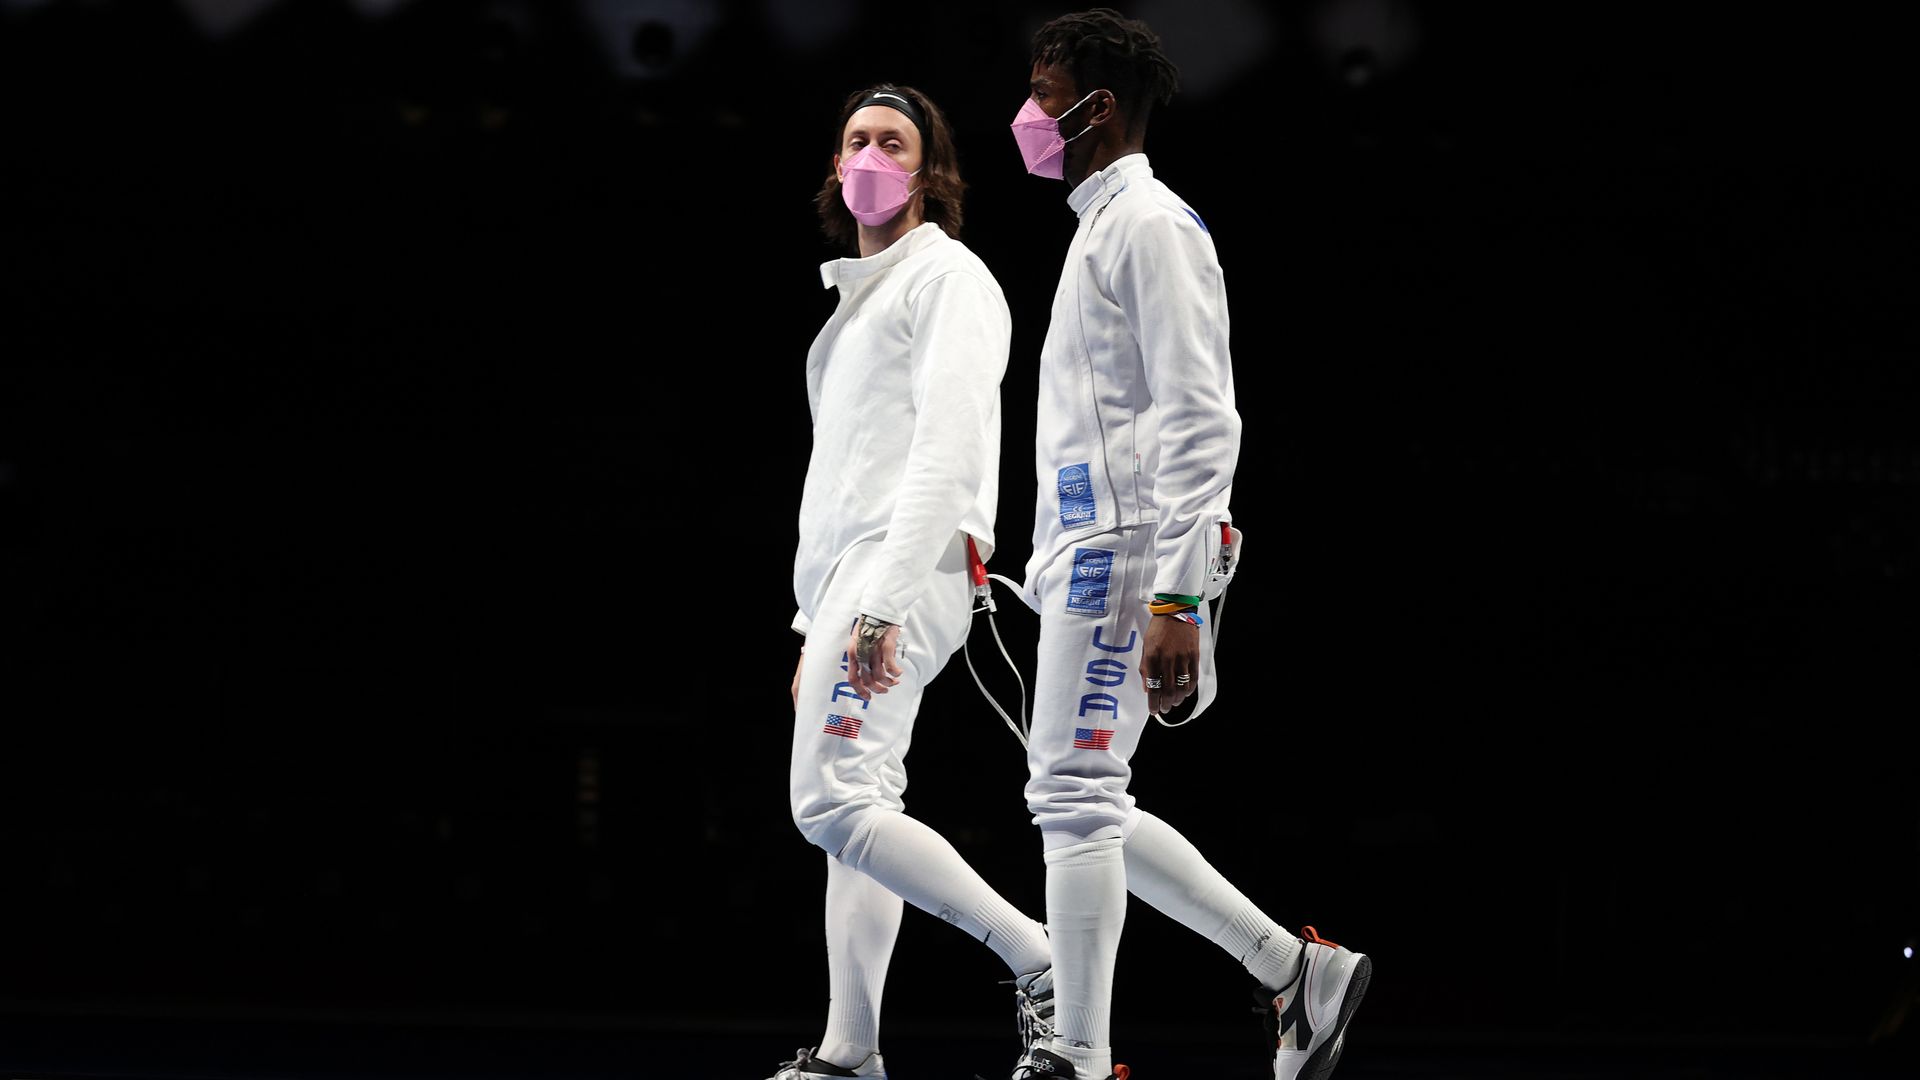 Jacob Hoyle of Team United States, left, and Curtis McDowald of Team United States react to their loss to Team Japan in Men's Épée Team